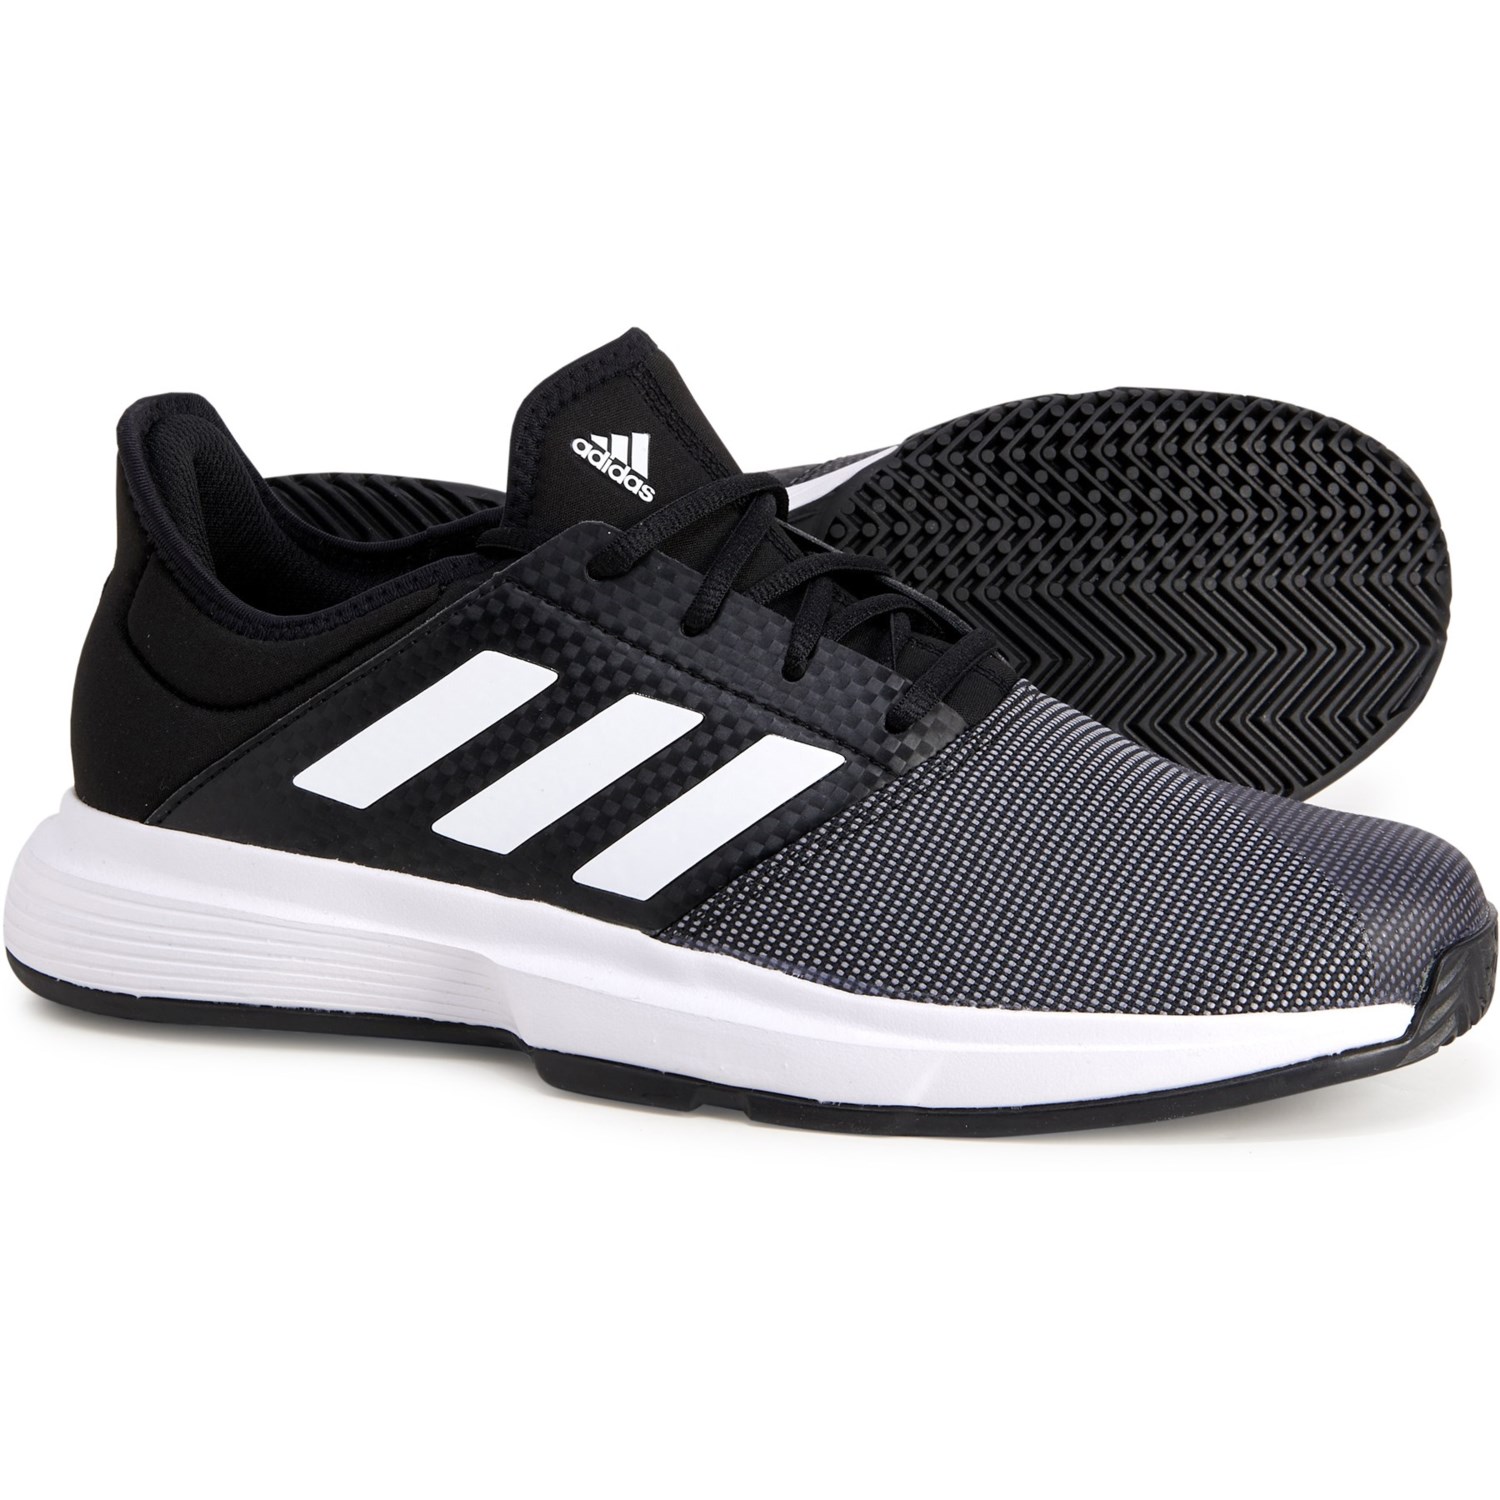 adidas game court mens tennis shoes